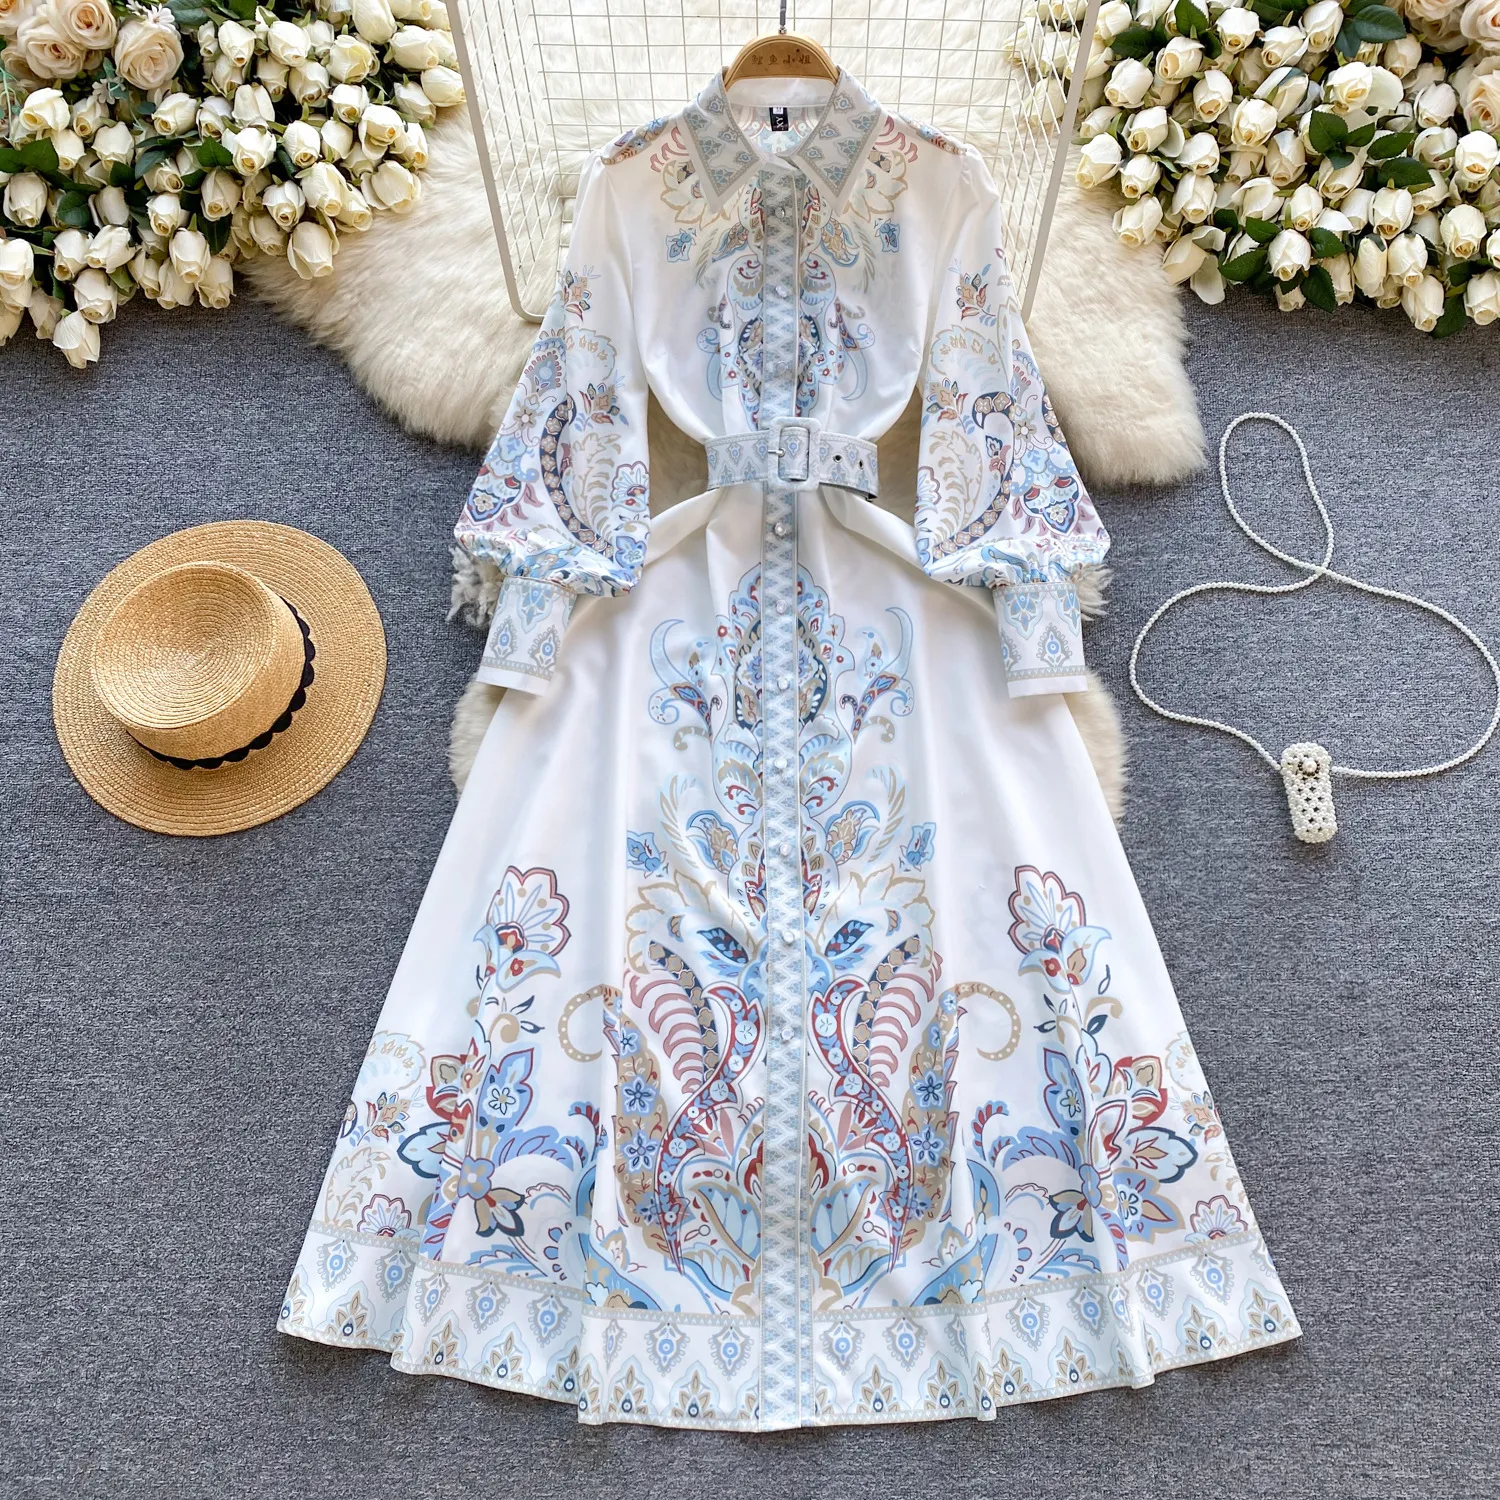 European court style dress for women with a retro print, slim fit, long bubble sleeves, and elegant spring dress for women